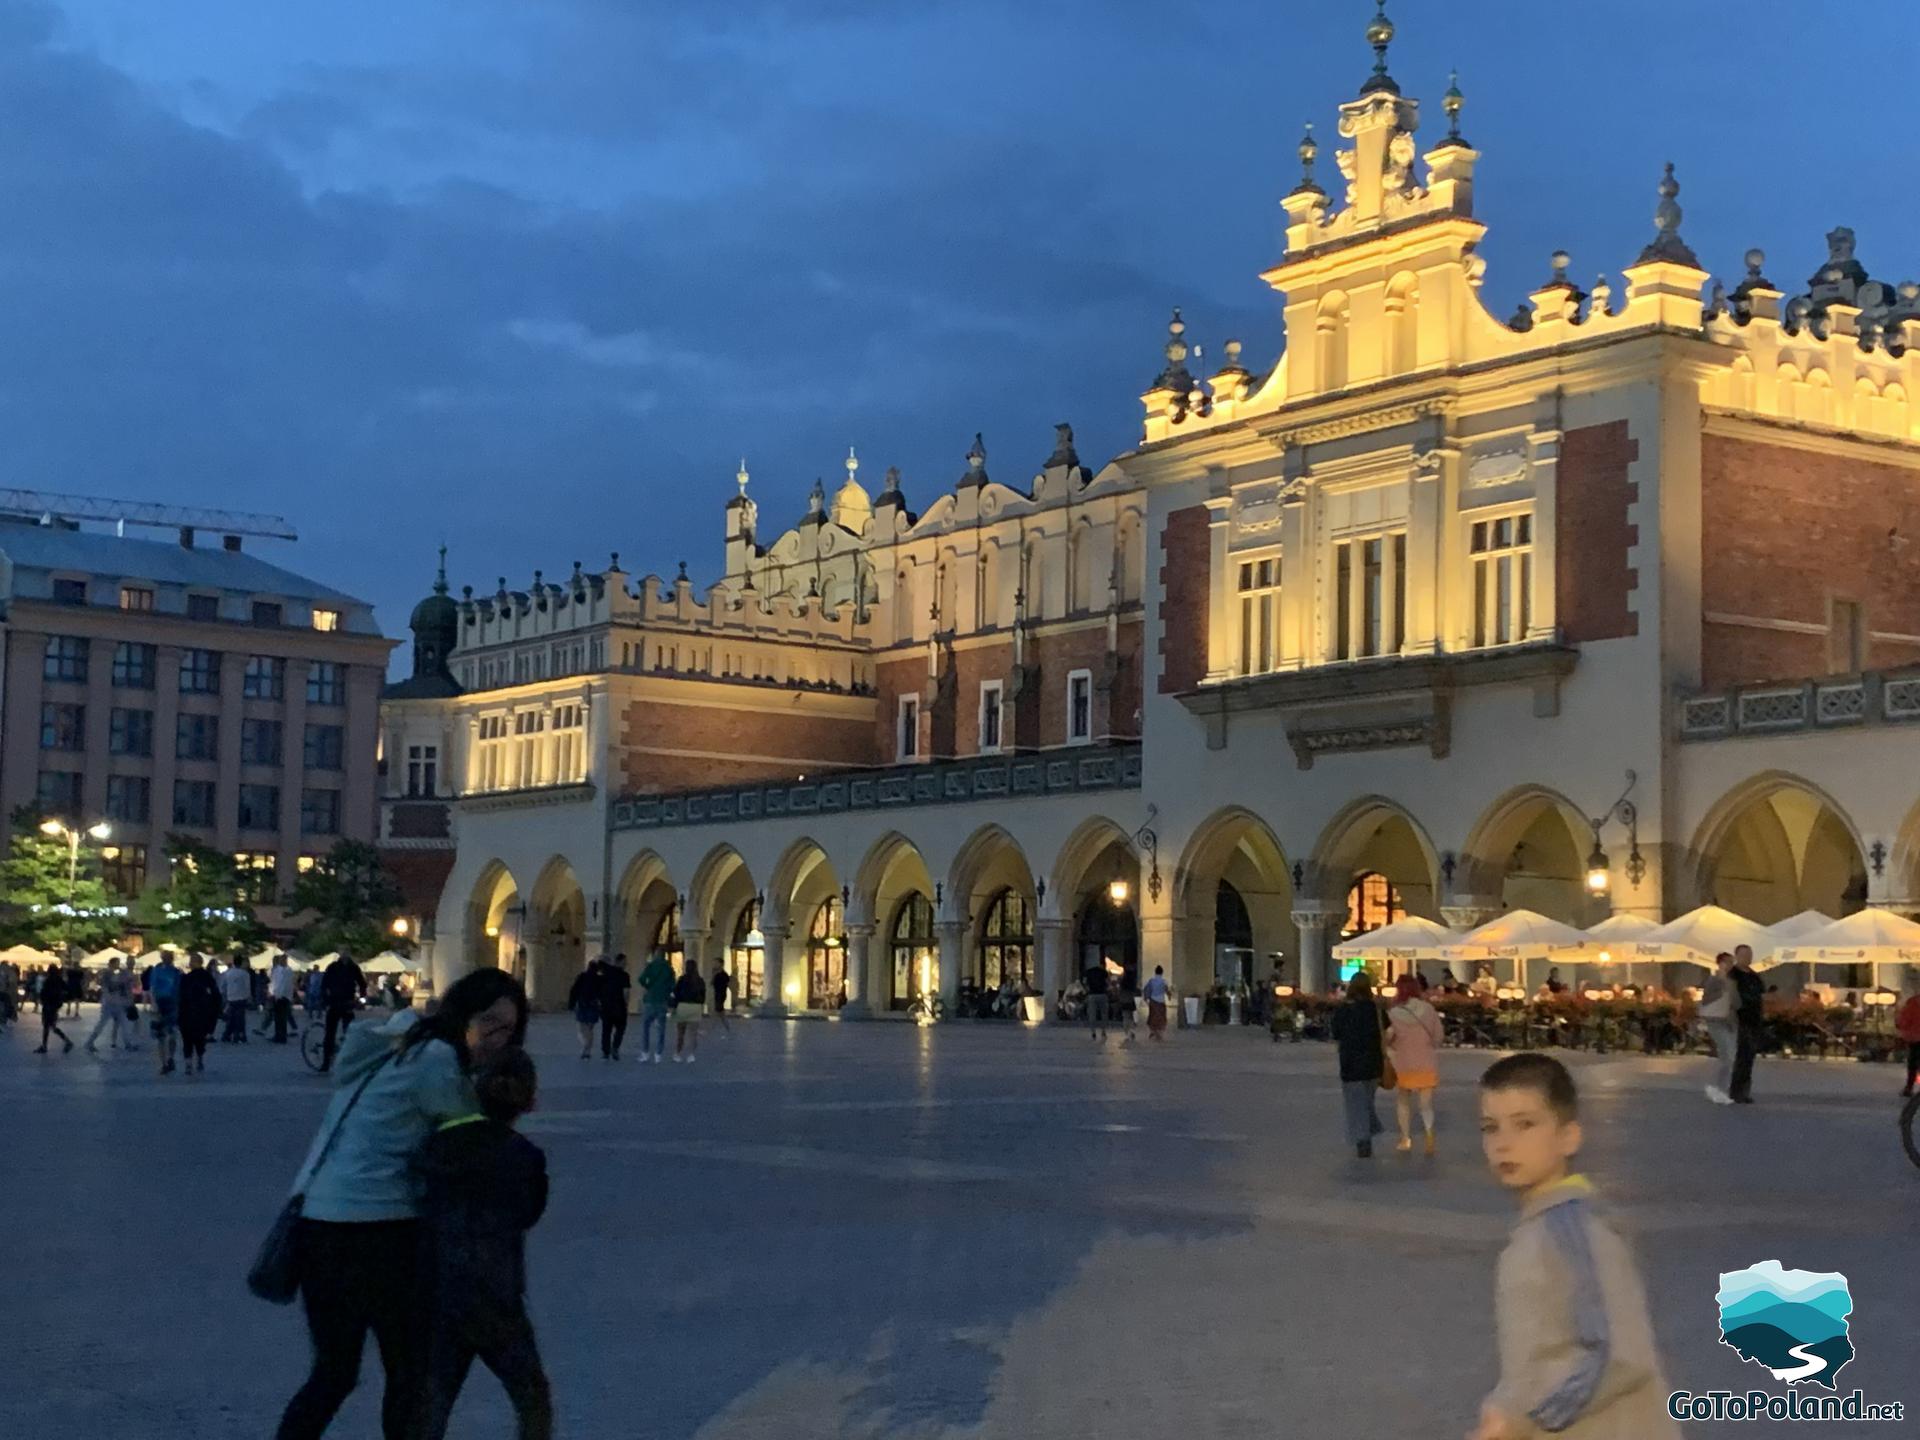 People are on the Main Square, the historical building the Cloth Hall is illuminated, its evening 